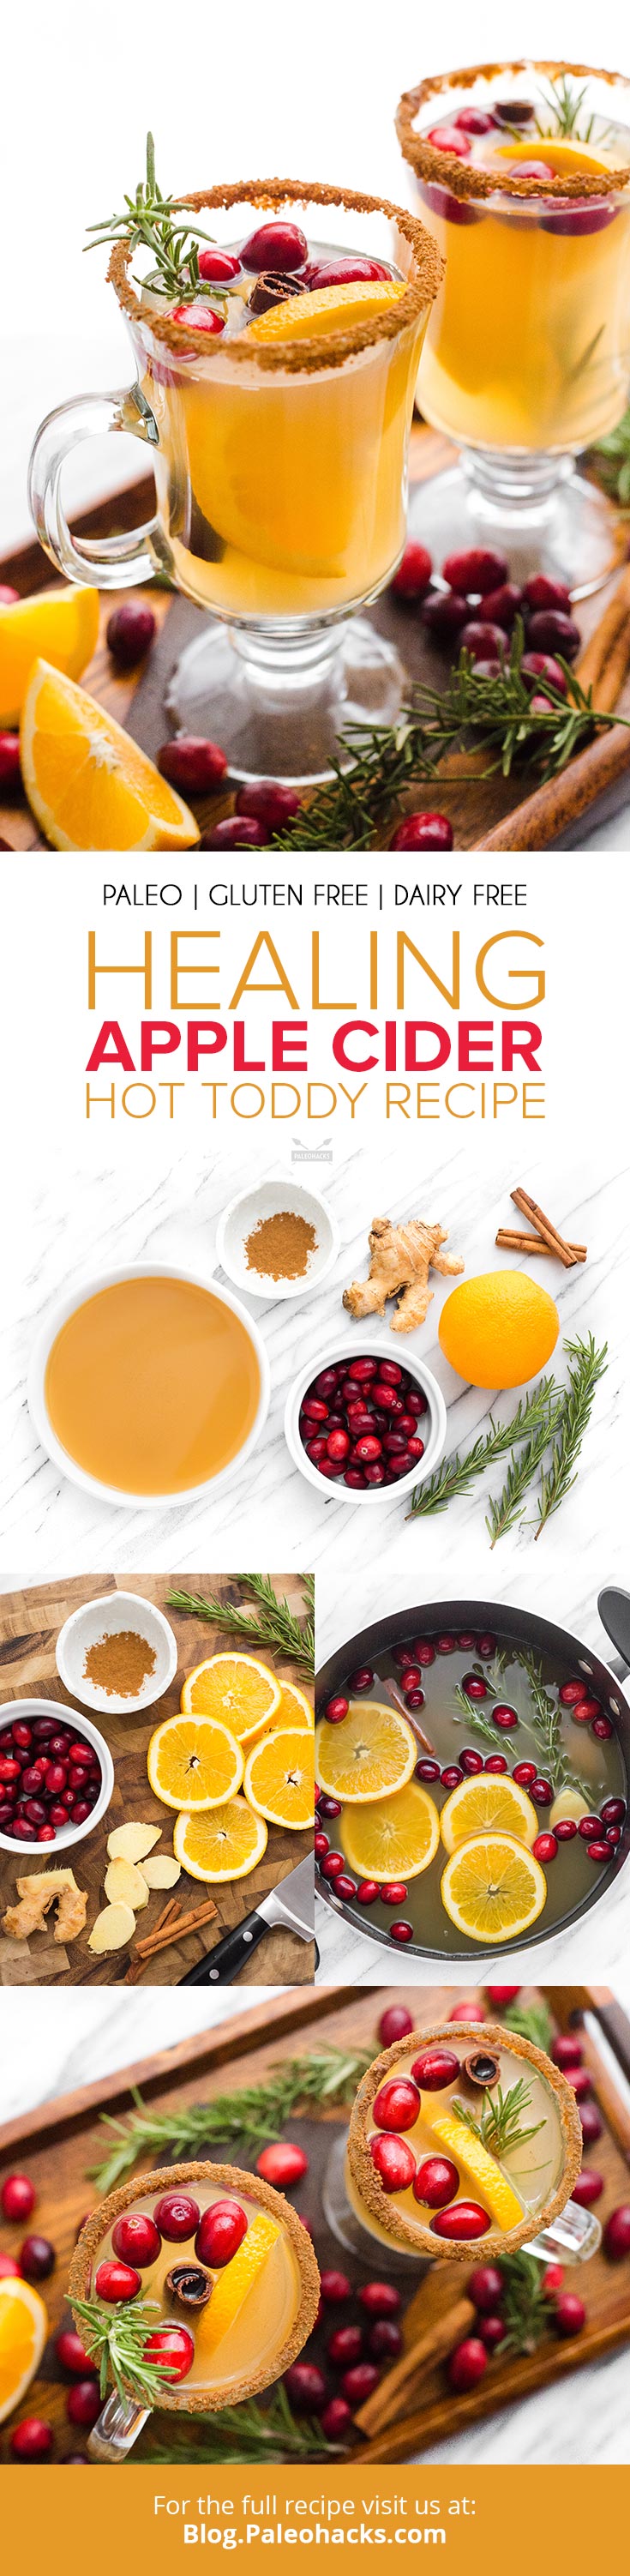 Brewed with a delicious mix of fresh fruits, rosemary, and ginger, this comforting hot toddy fuses anti-inflammatory nutrients with natural sugars and spice.